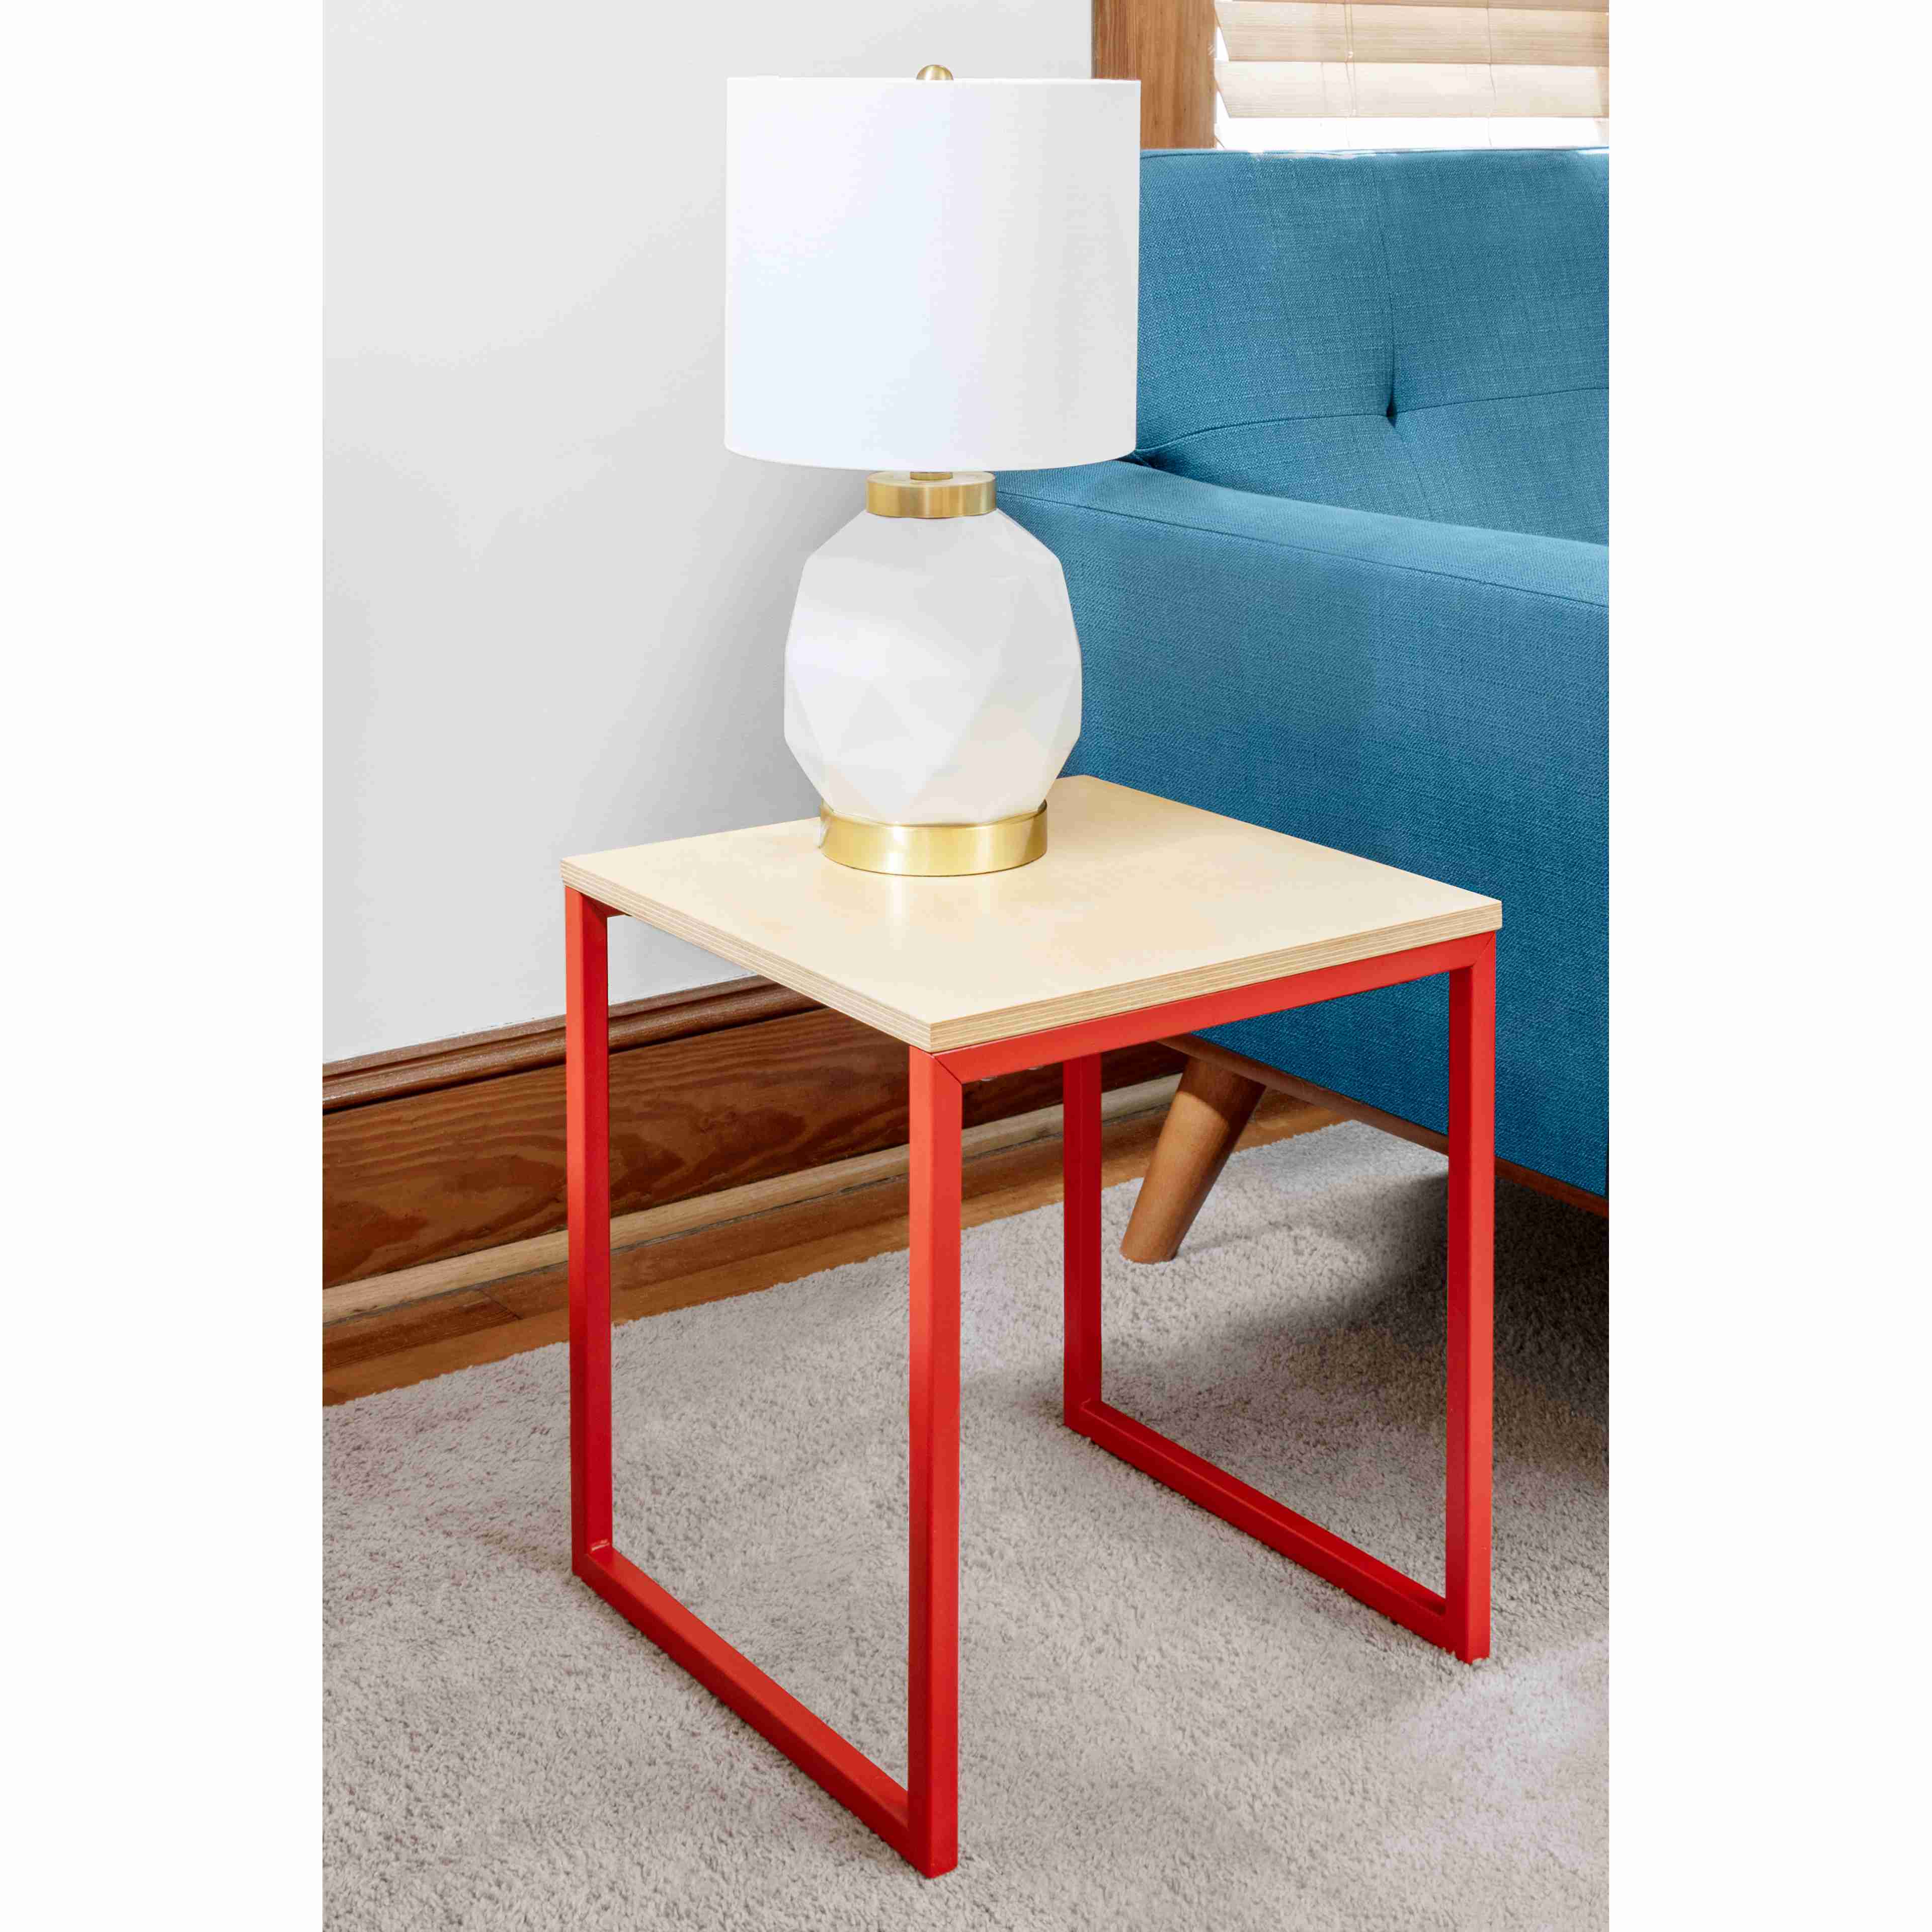 modern-side-table-mid-century-small-square-red for cheap